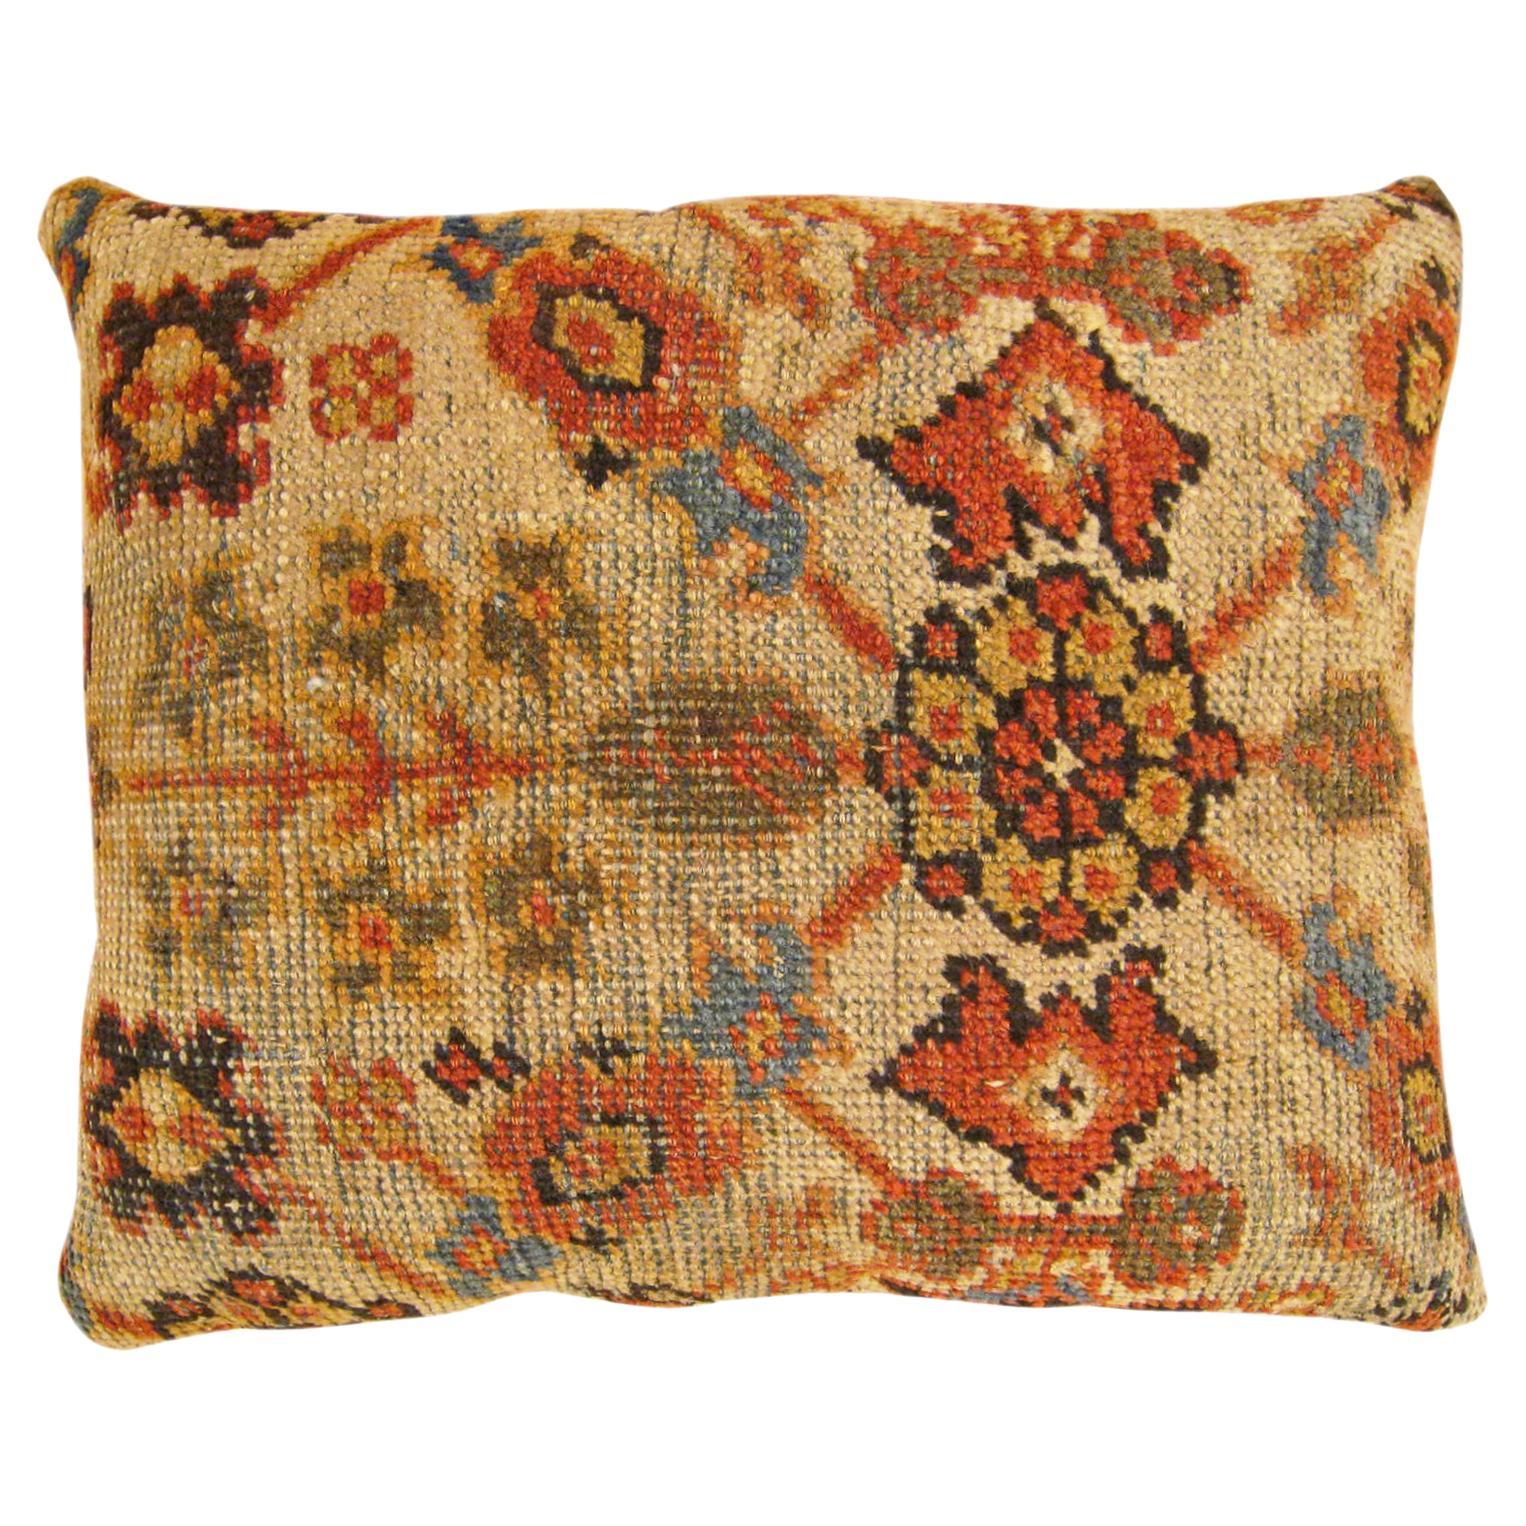 Decorative Antique Persian Sultanabad Pillow with Floral & Geometric Abstracts